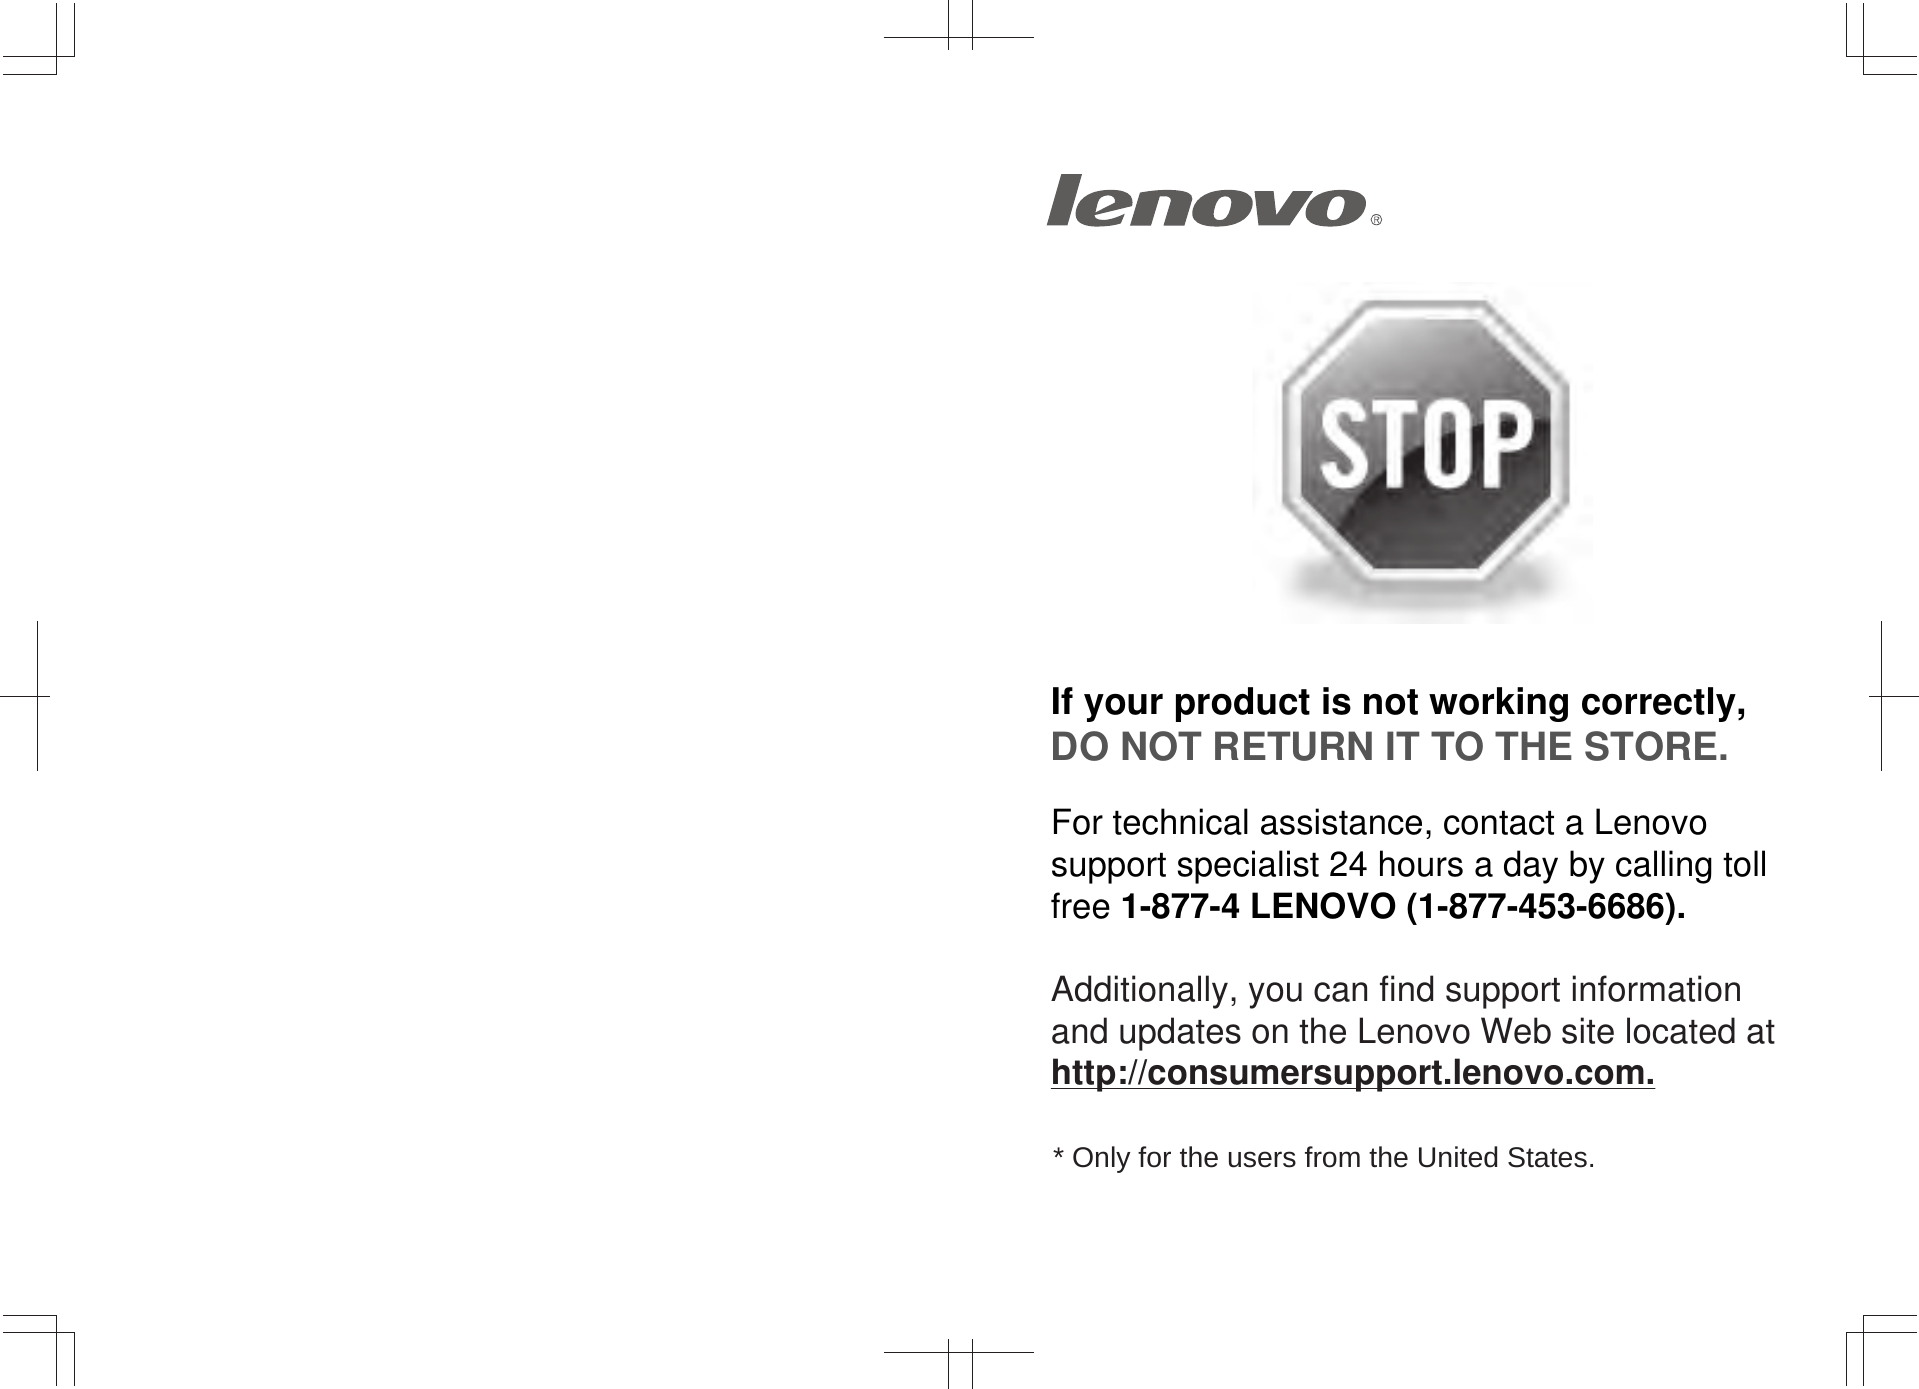 If your product is not working correctly, DO NOT RETURN IT TO THE STORE.For technical assistance, contact a Lenovo support specialist 24 hours a day by calling toll free 1-877-4 LENOVO (1-877-453-6686).   Additionally, you can find support information and updates on the Lenovo Web site located at http://consumersupport.lenovo.com.* Only for the users from the United States.